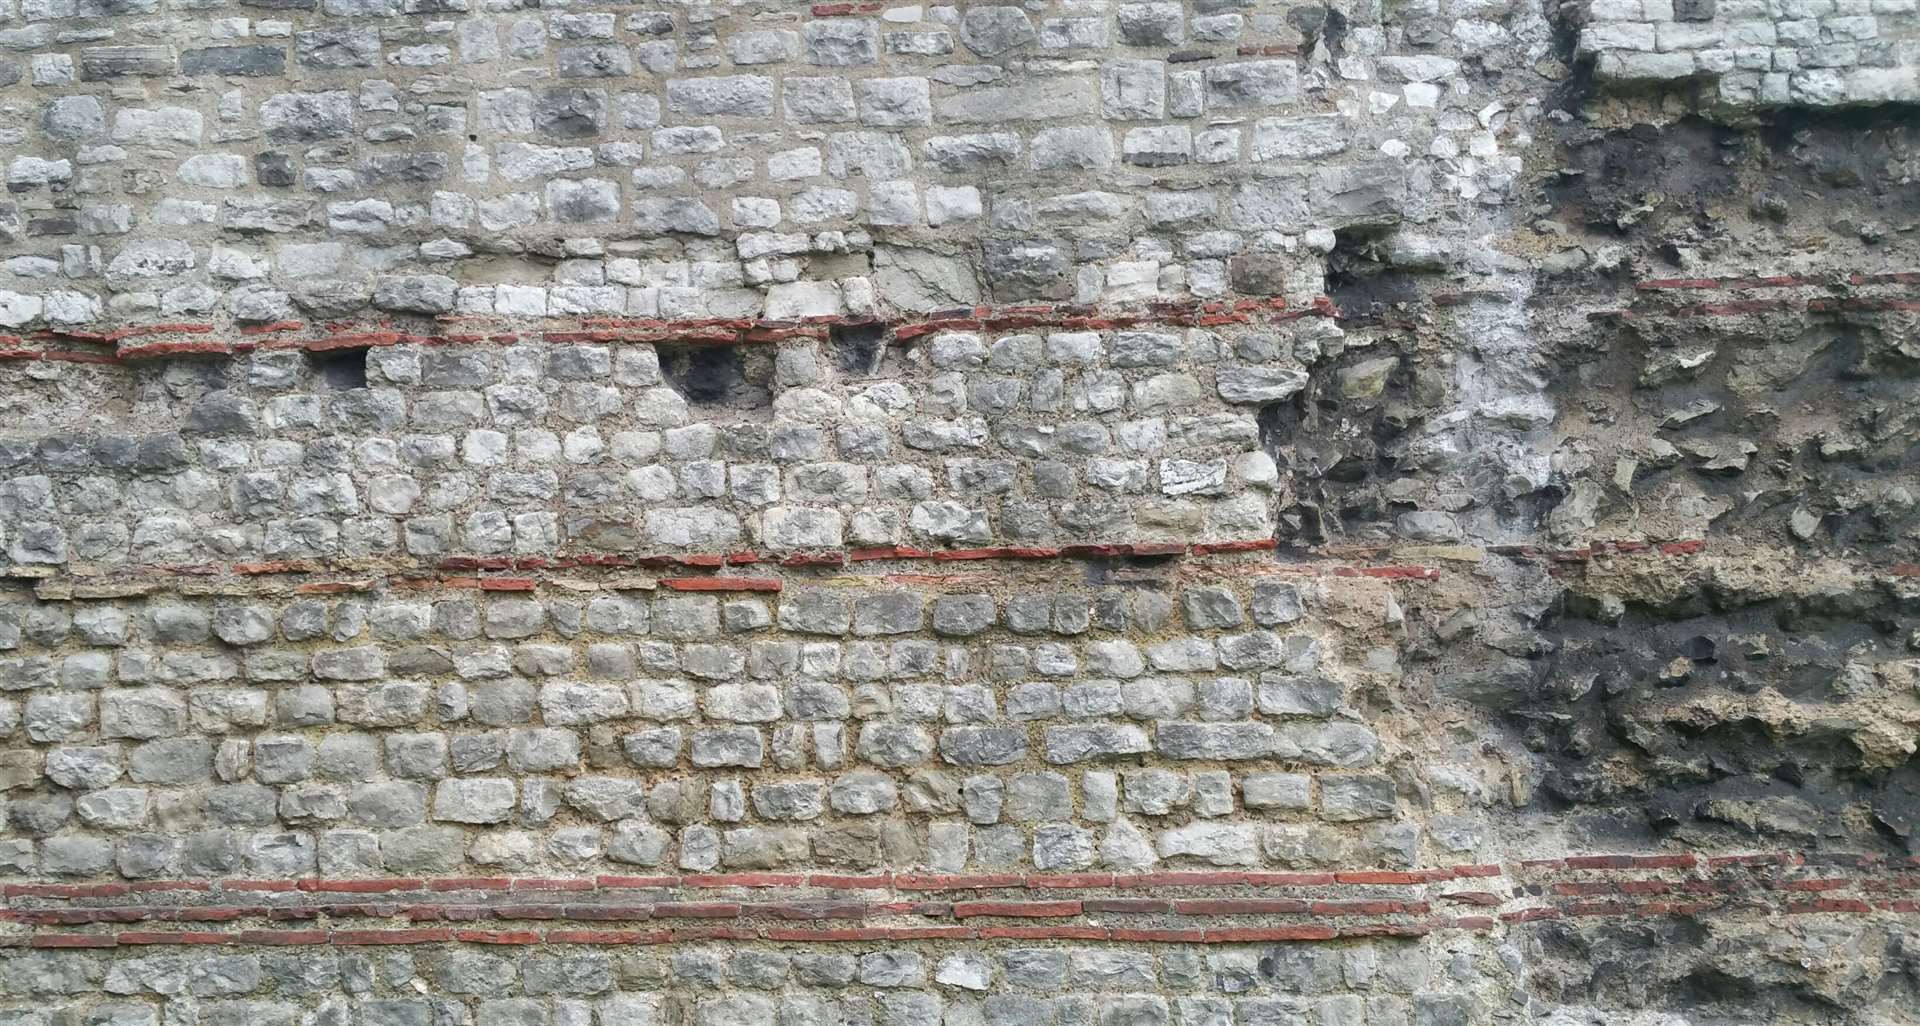 Finely worked ragstone blocks visible in this section of the Roman land wall of London near Tower Hill tube station, all transported from the quarries in the upper Medway Valley